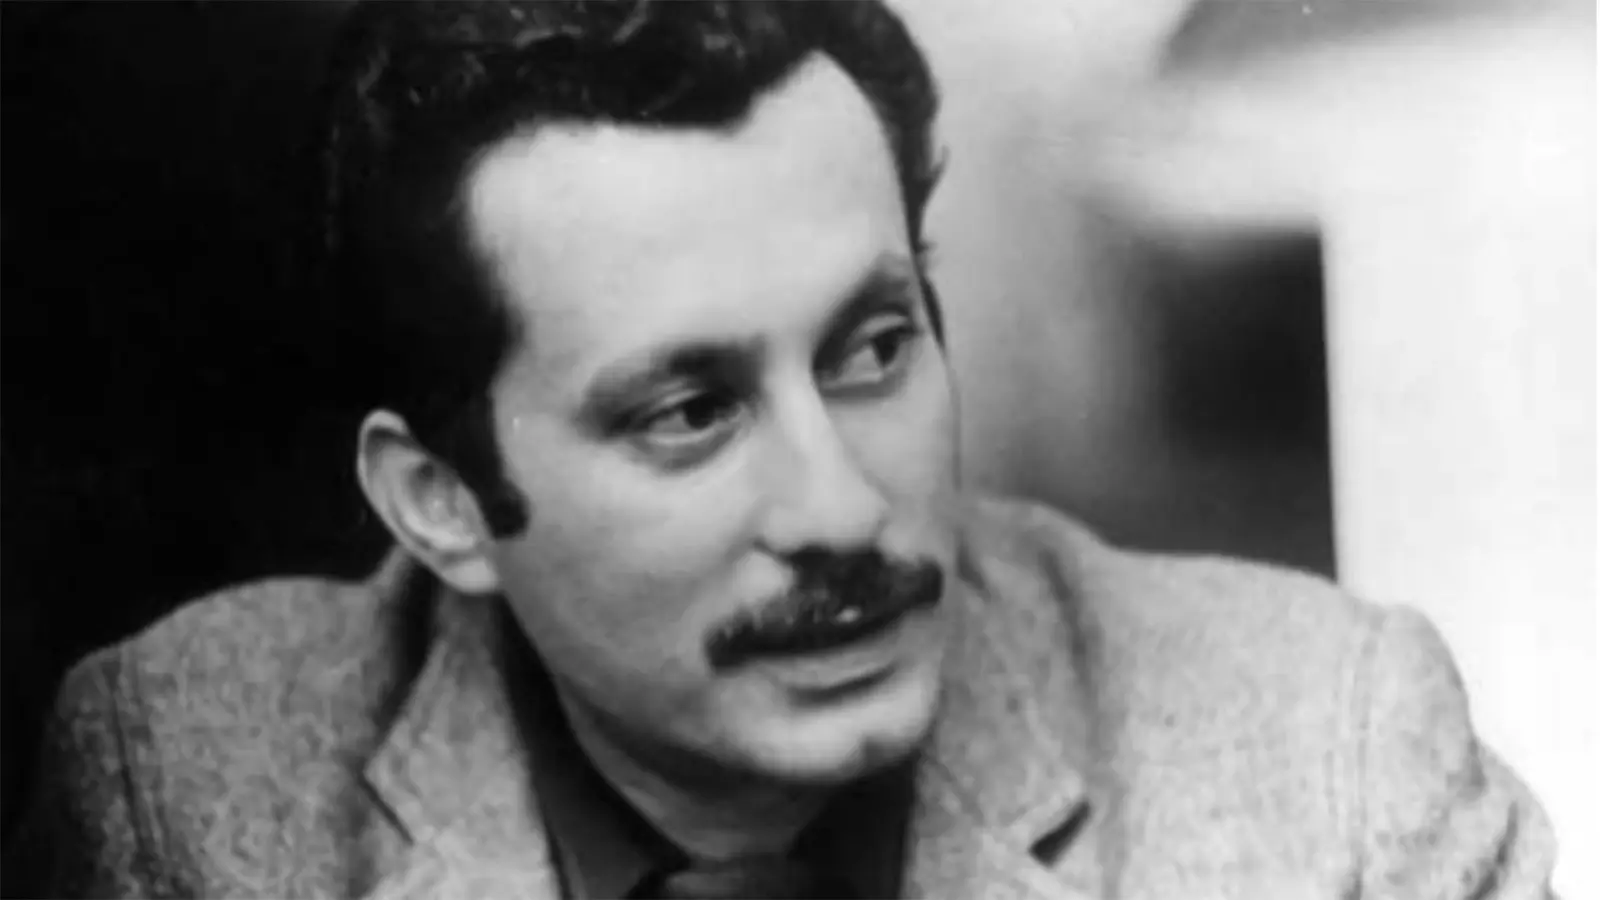 Ghassan Kanafani, who was assassinated by Mossad in 1971, wrote what is widely believed to be the first major work of Palestinian fiction, Men in the Sun.